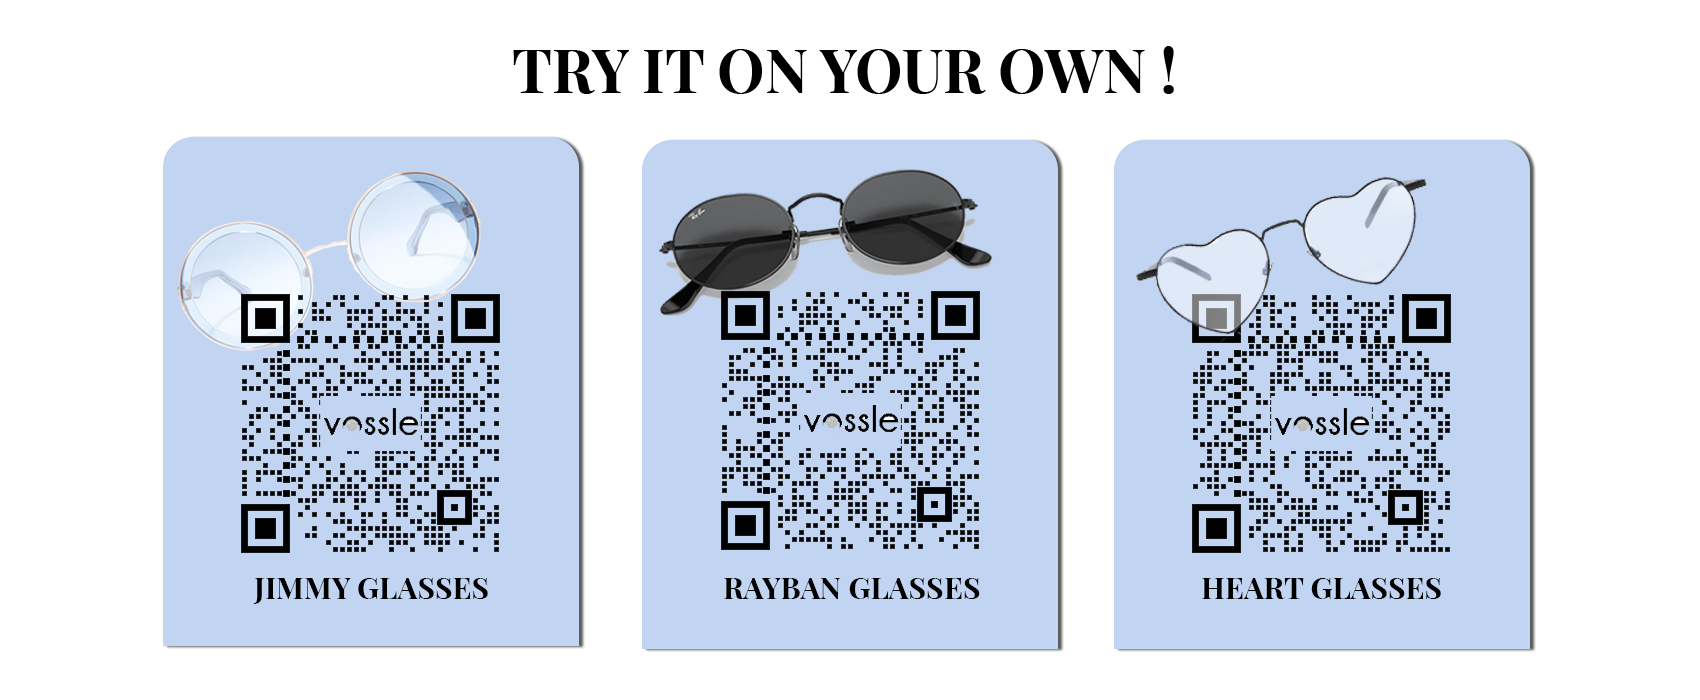 vossle glasses tryon qr codes